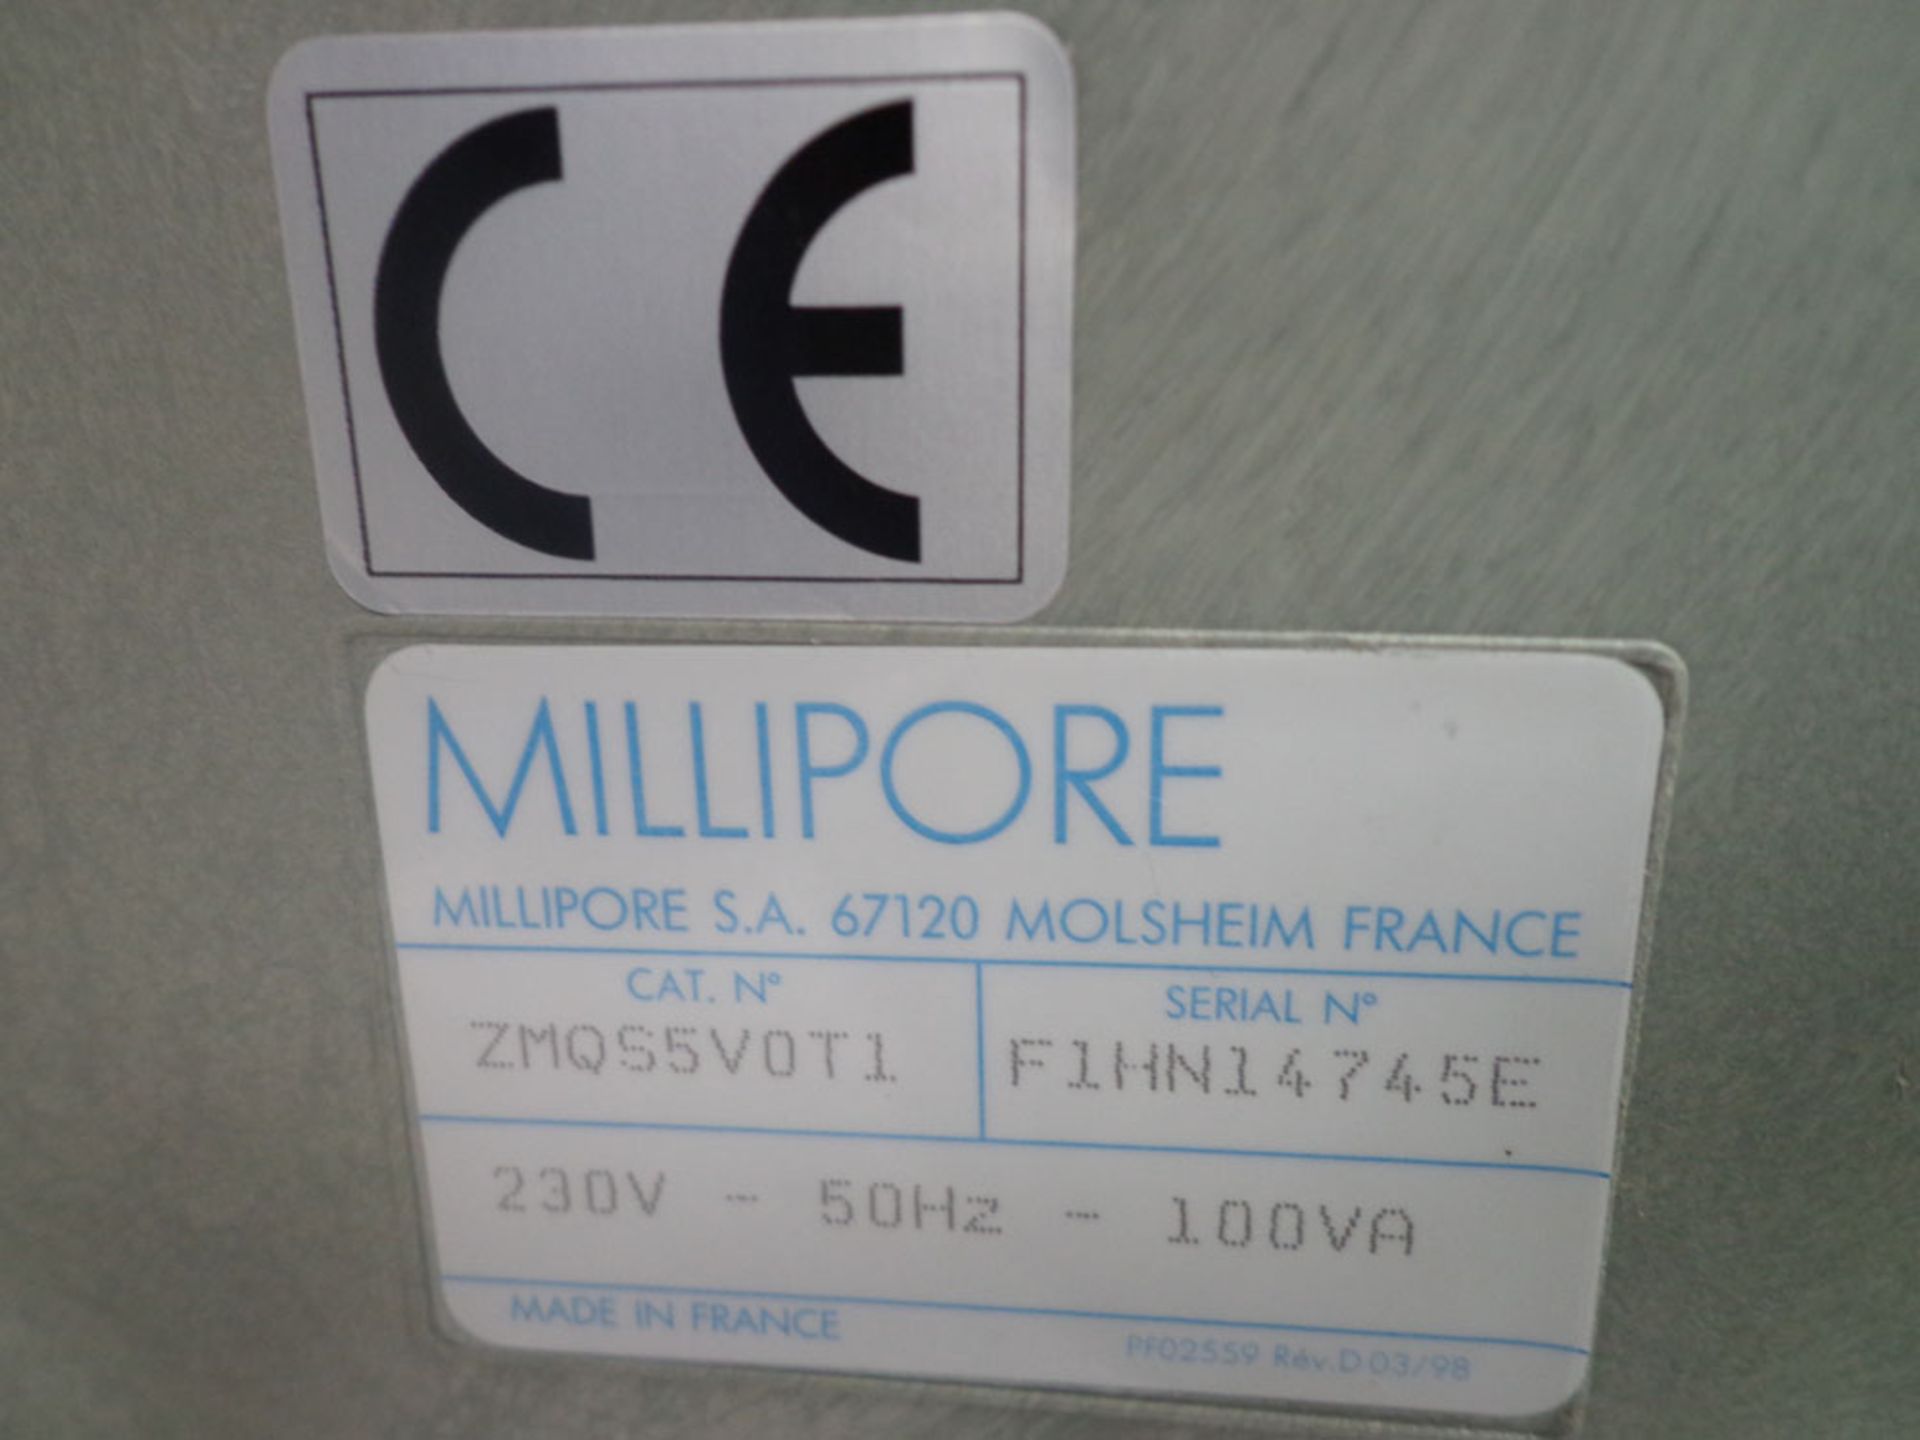 Millipore Water Purification, F1HN1475E - Image 9 of 9